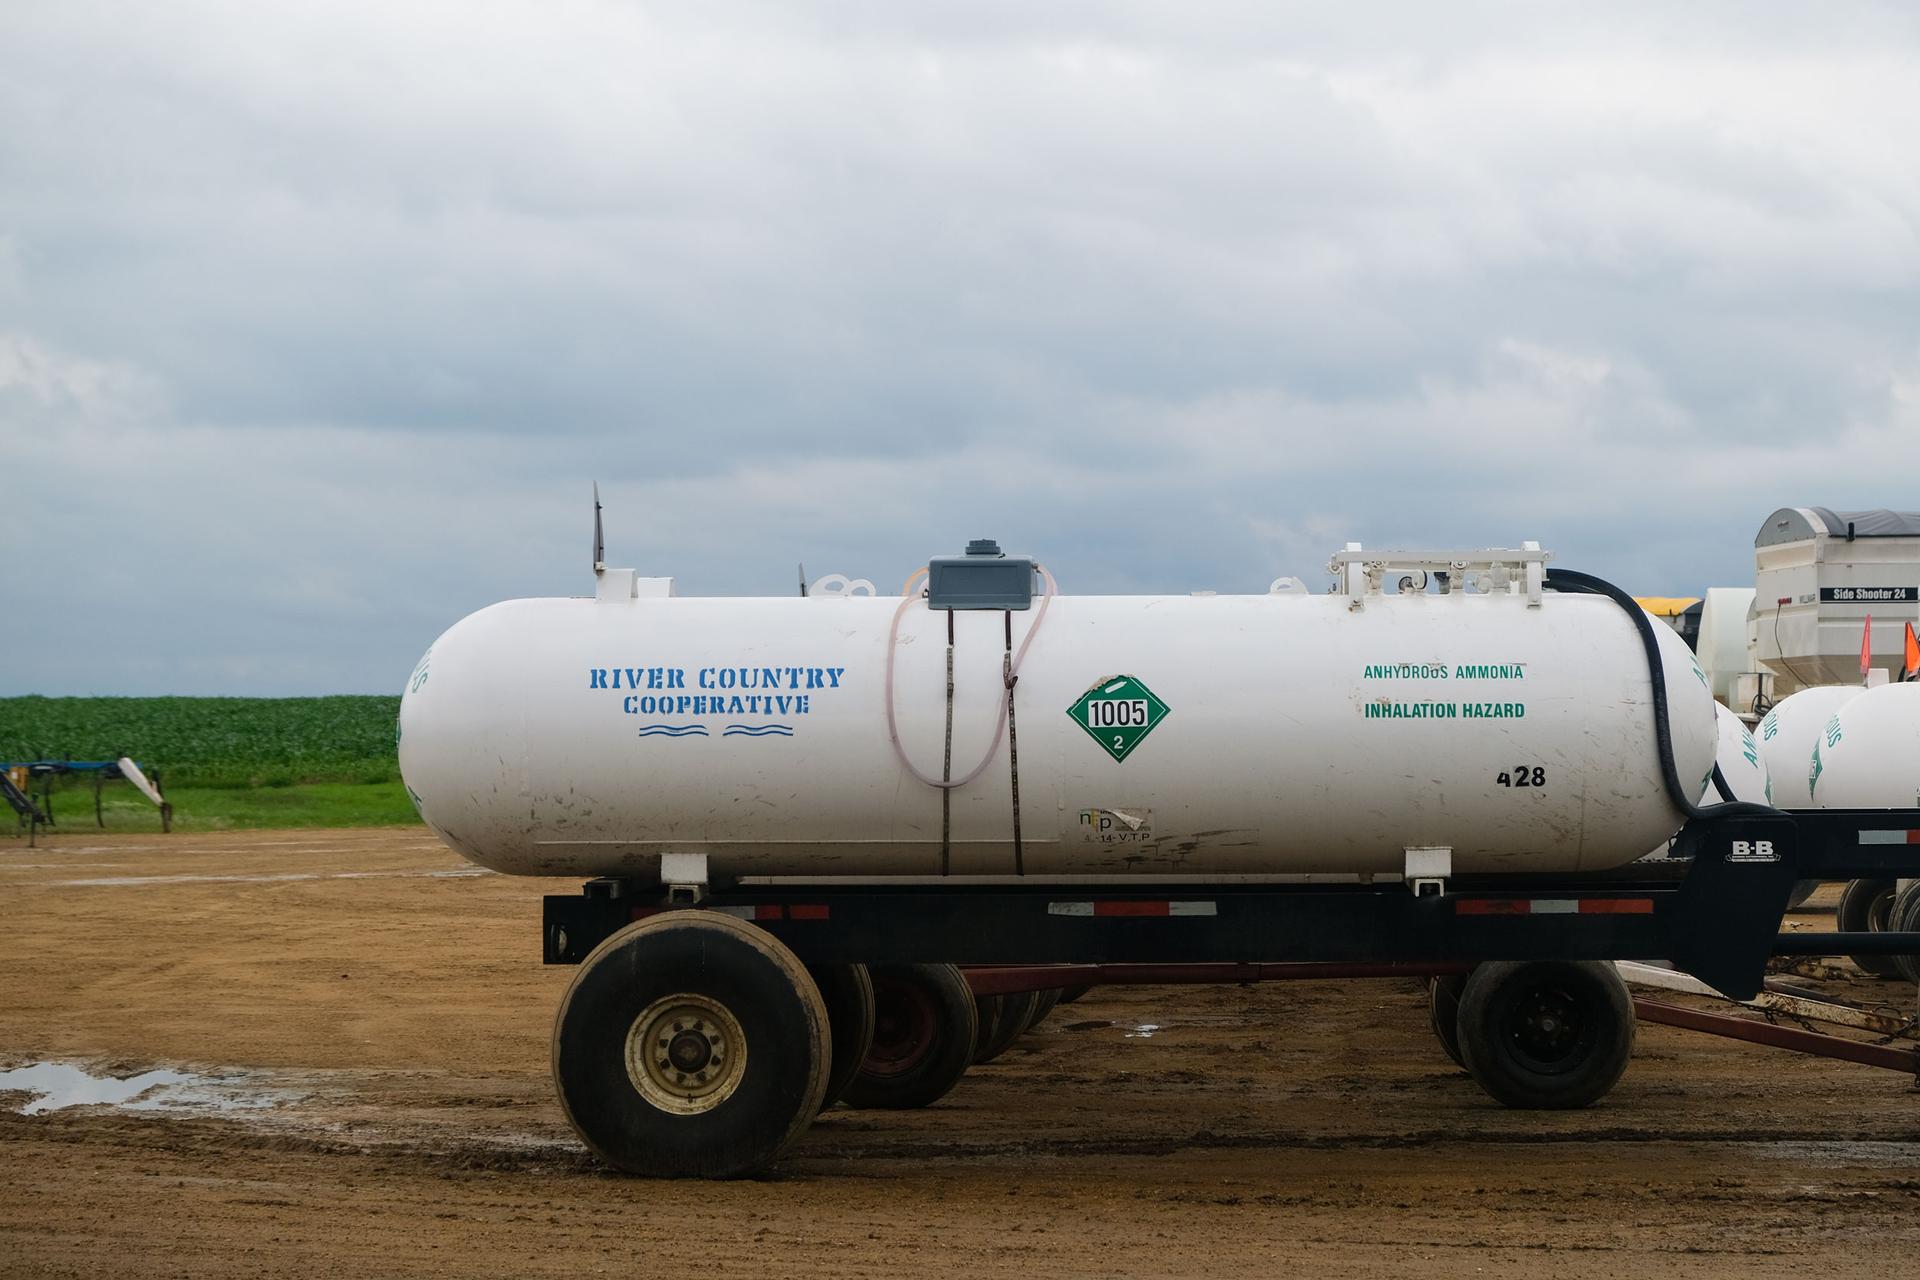 A trailer with a tank of anhydrous ammonia is shown parked on a dirt parking lot.